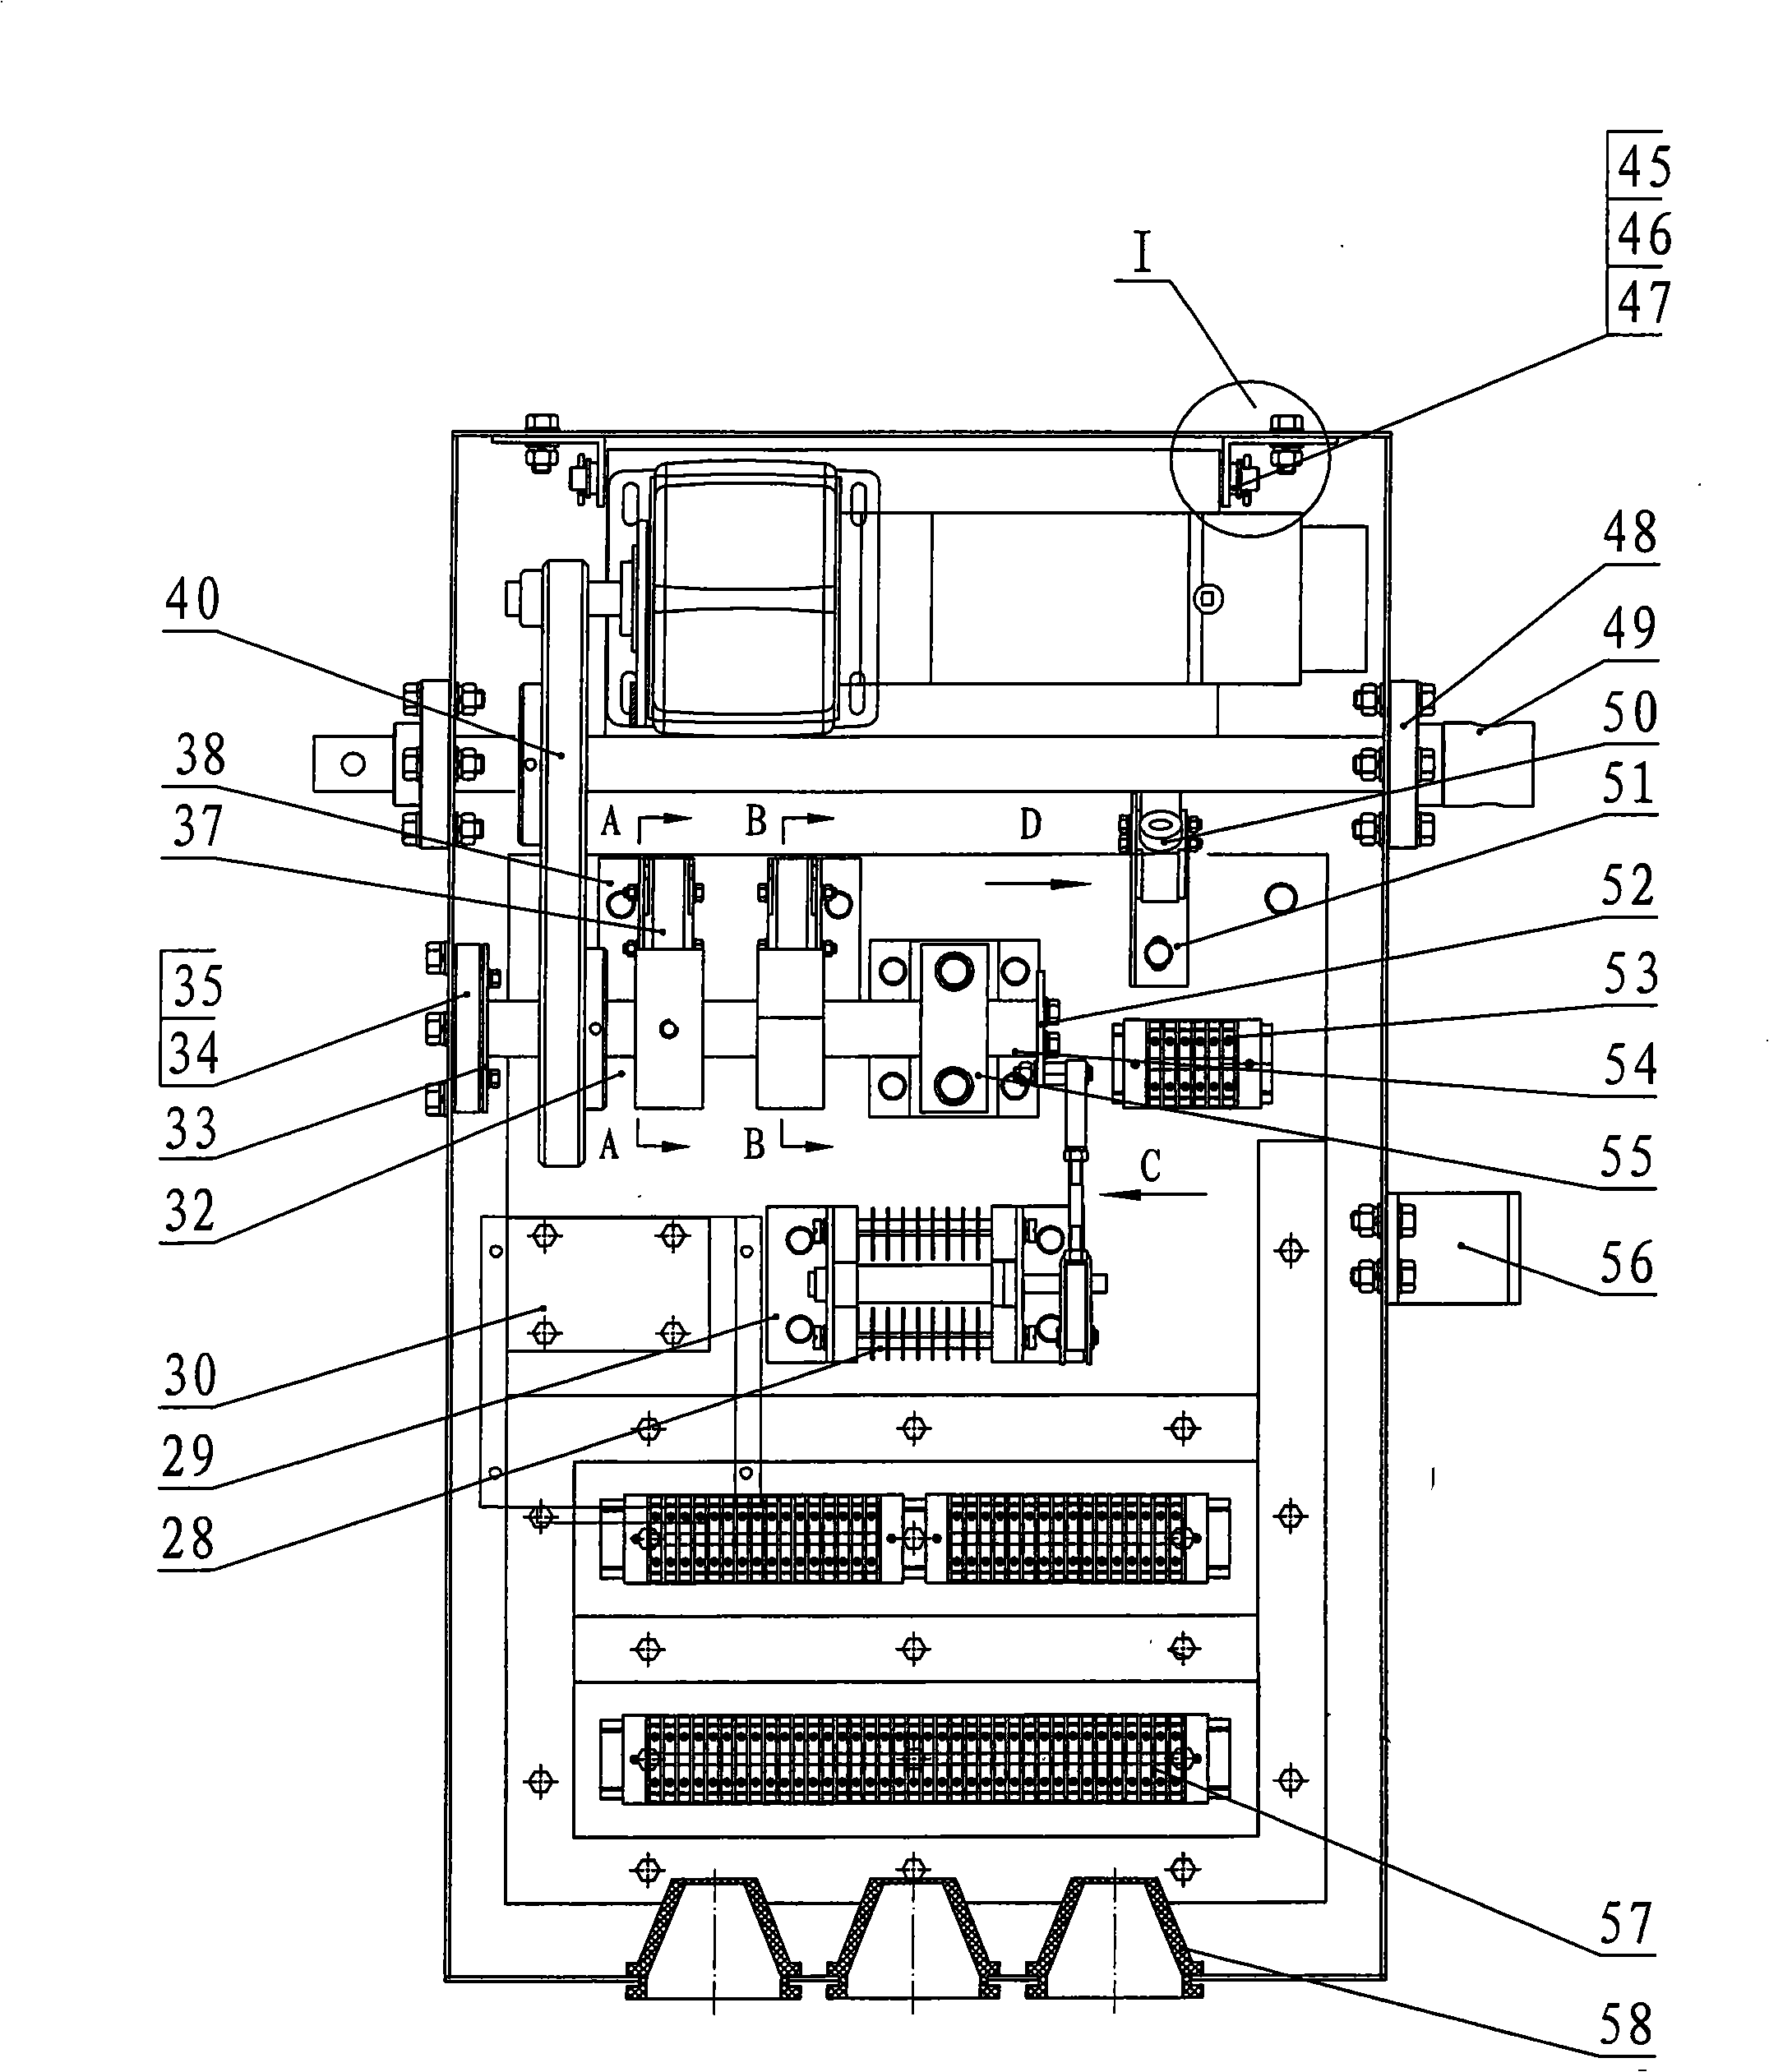 Electrical control apparatus for bipolar isolation switch of railway traffic